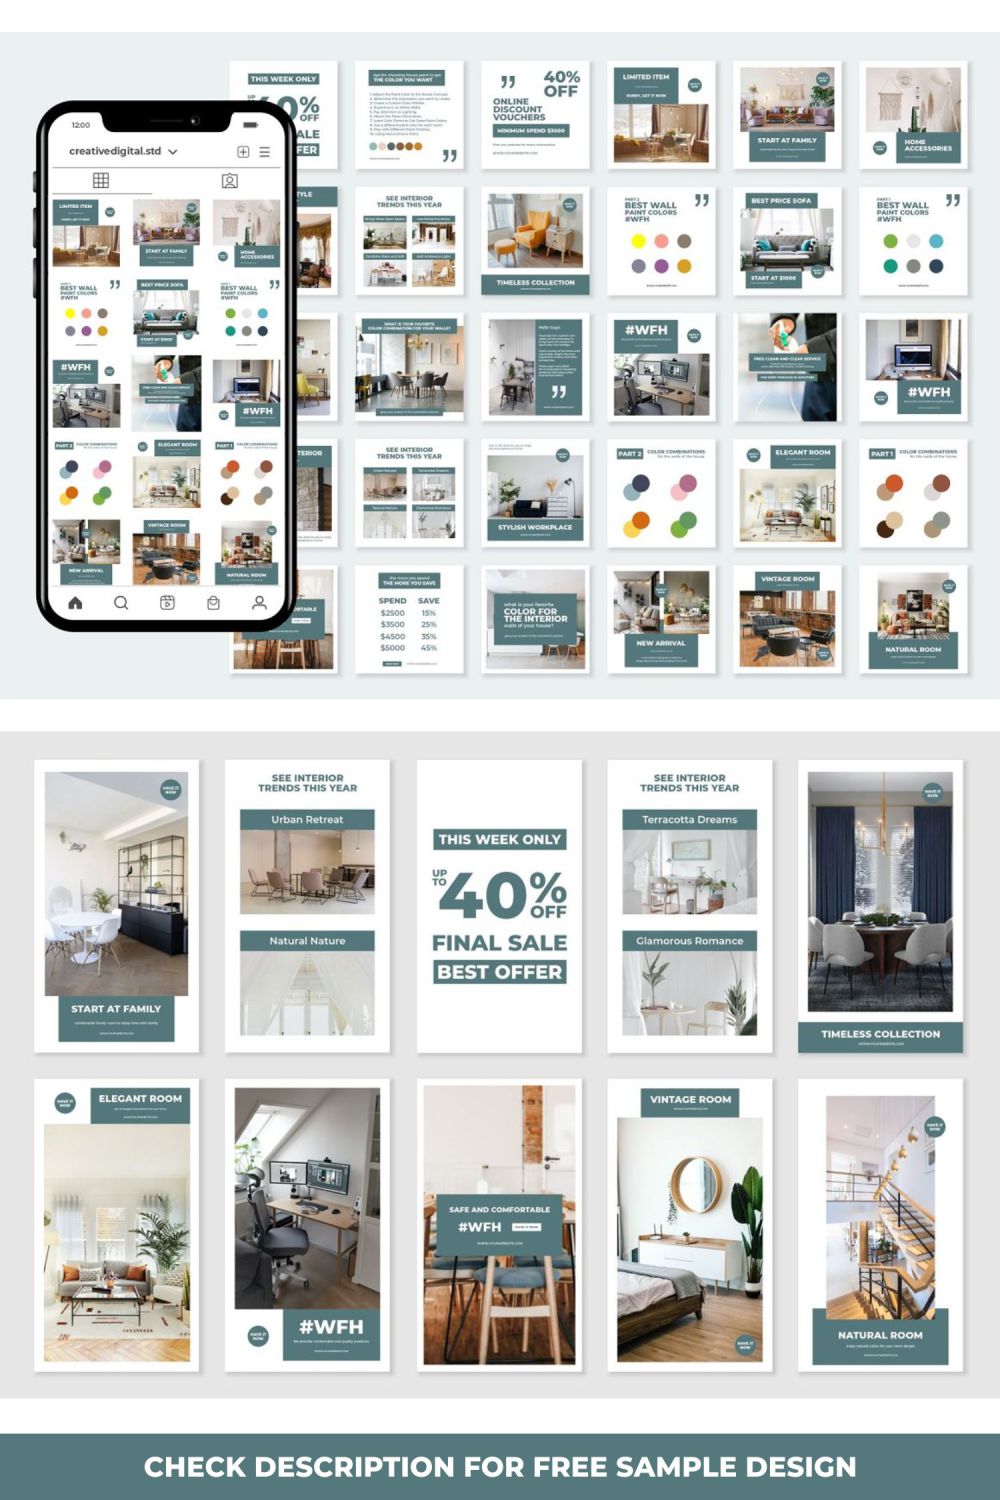 Home Decor Story And Icon Social Media Template Canva Photoshop Illustrator Pinterest Image.